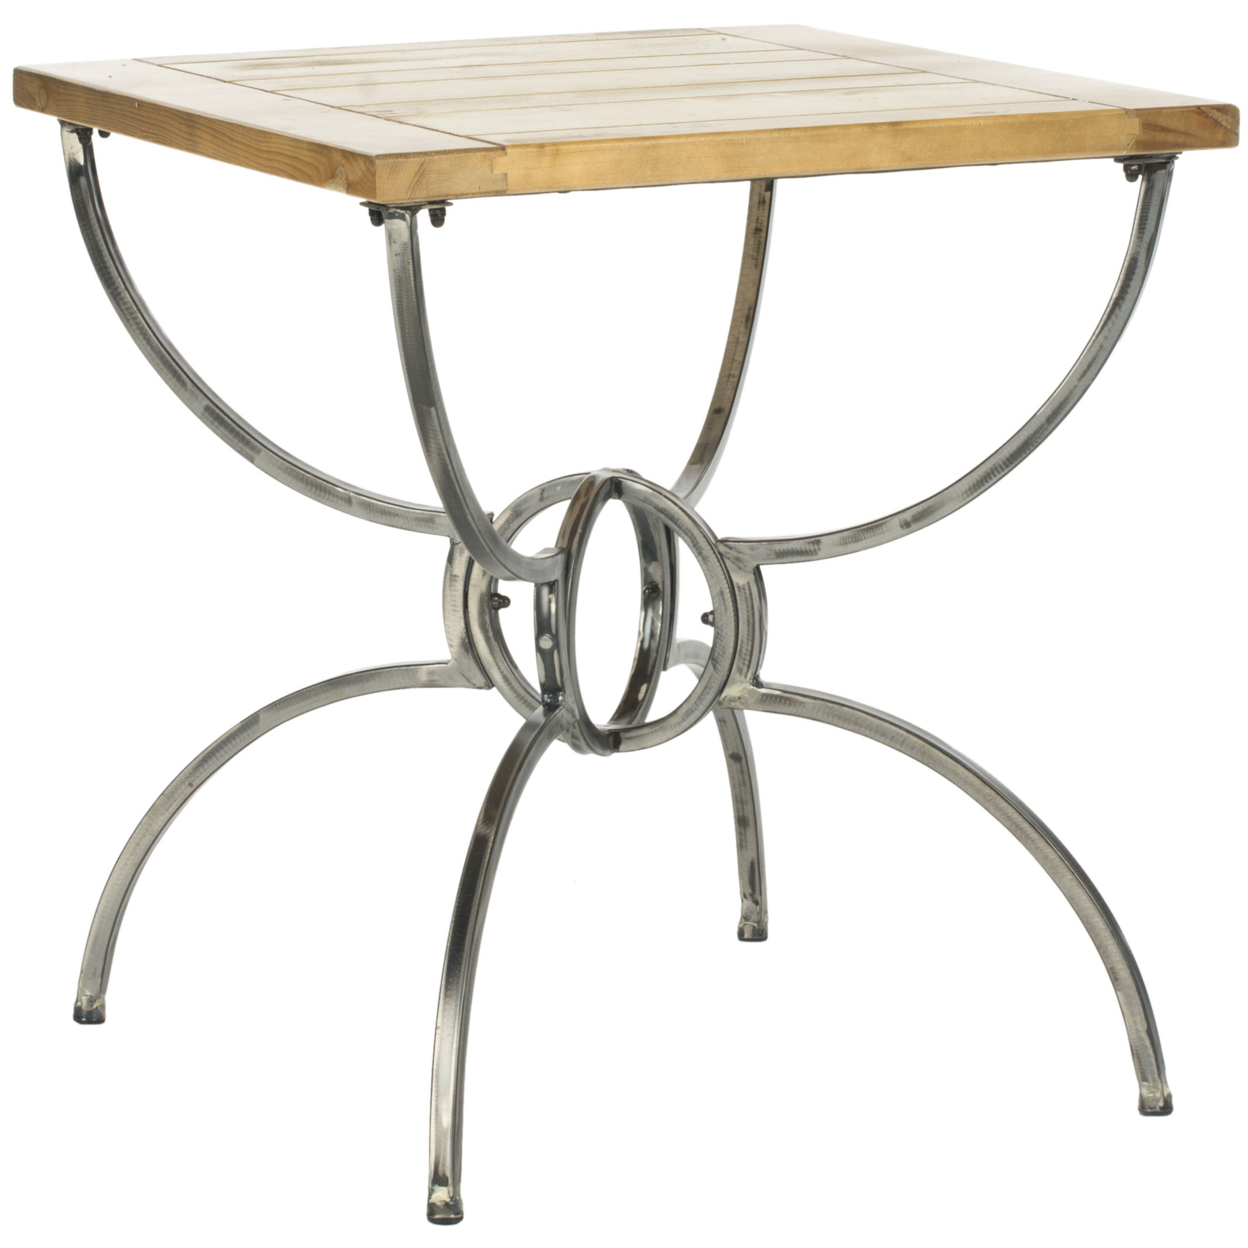 SAFAVIEH Alvin Wood Top End Table Natural